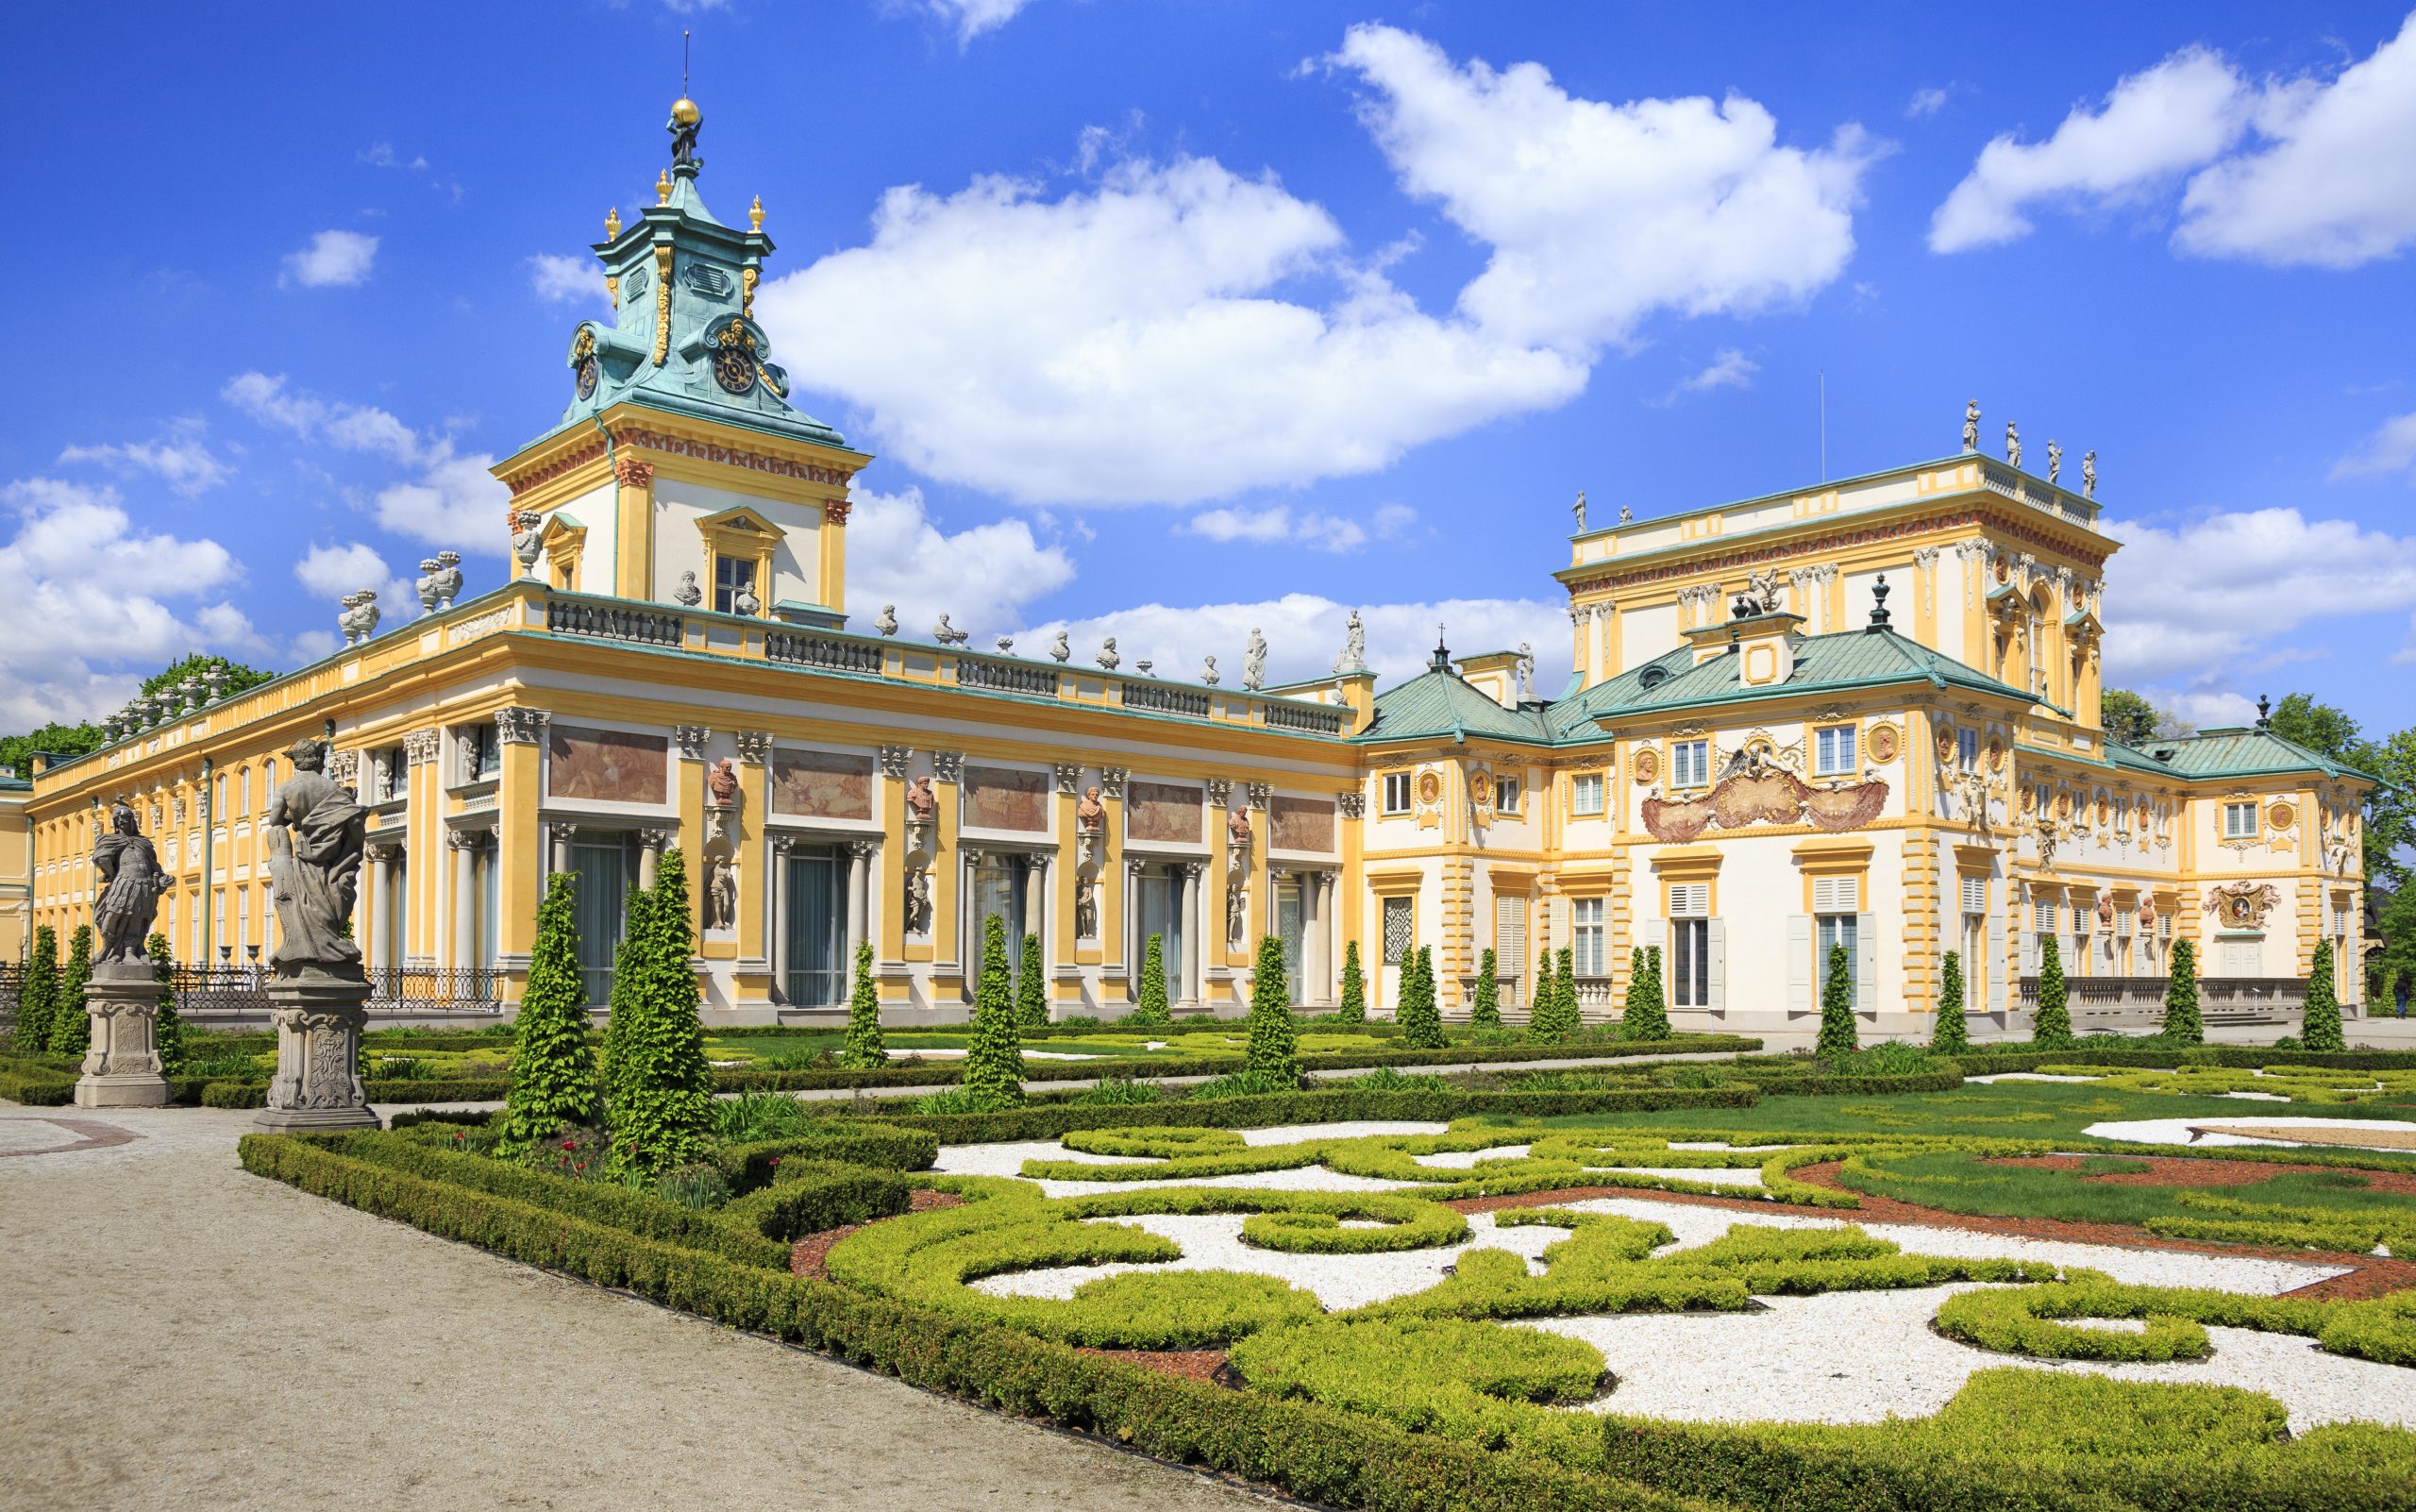 Wilanow Palace - Things to see in Warsaw